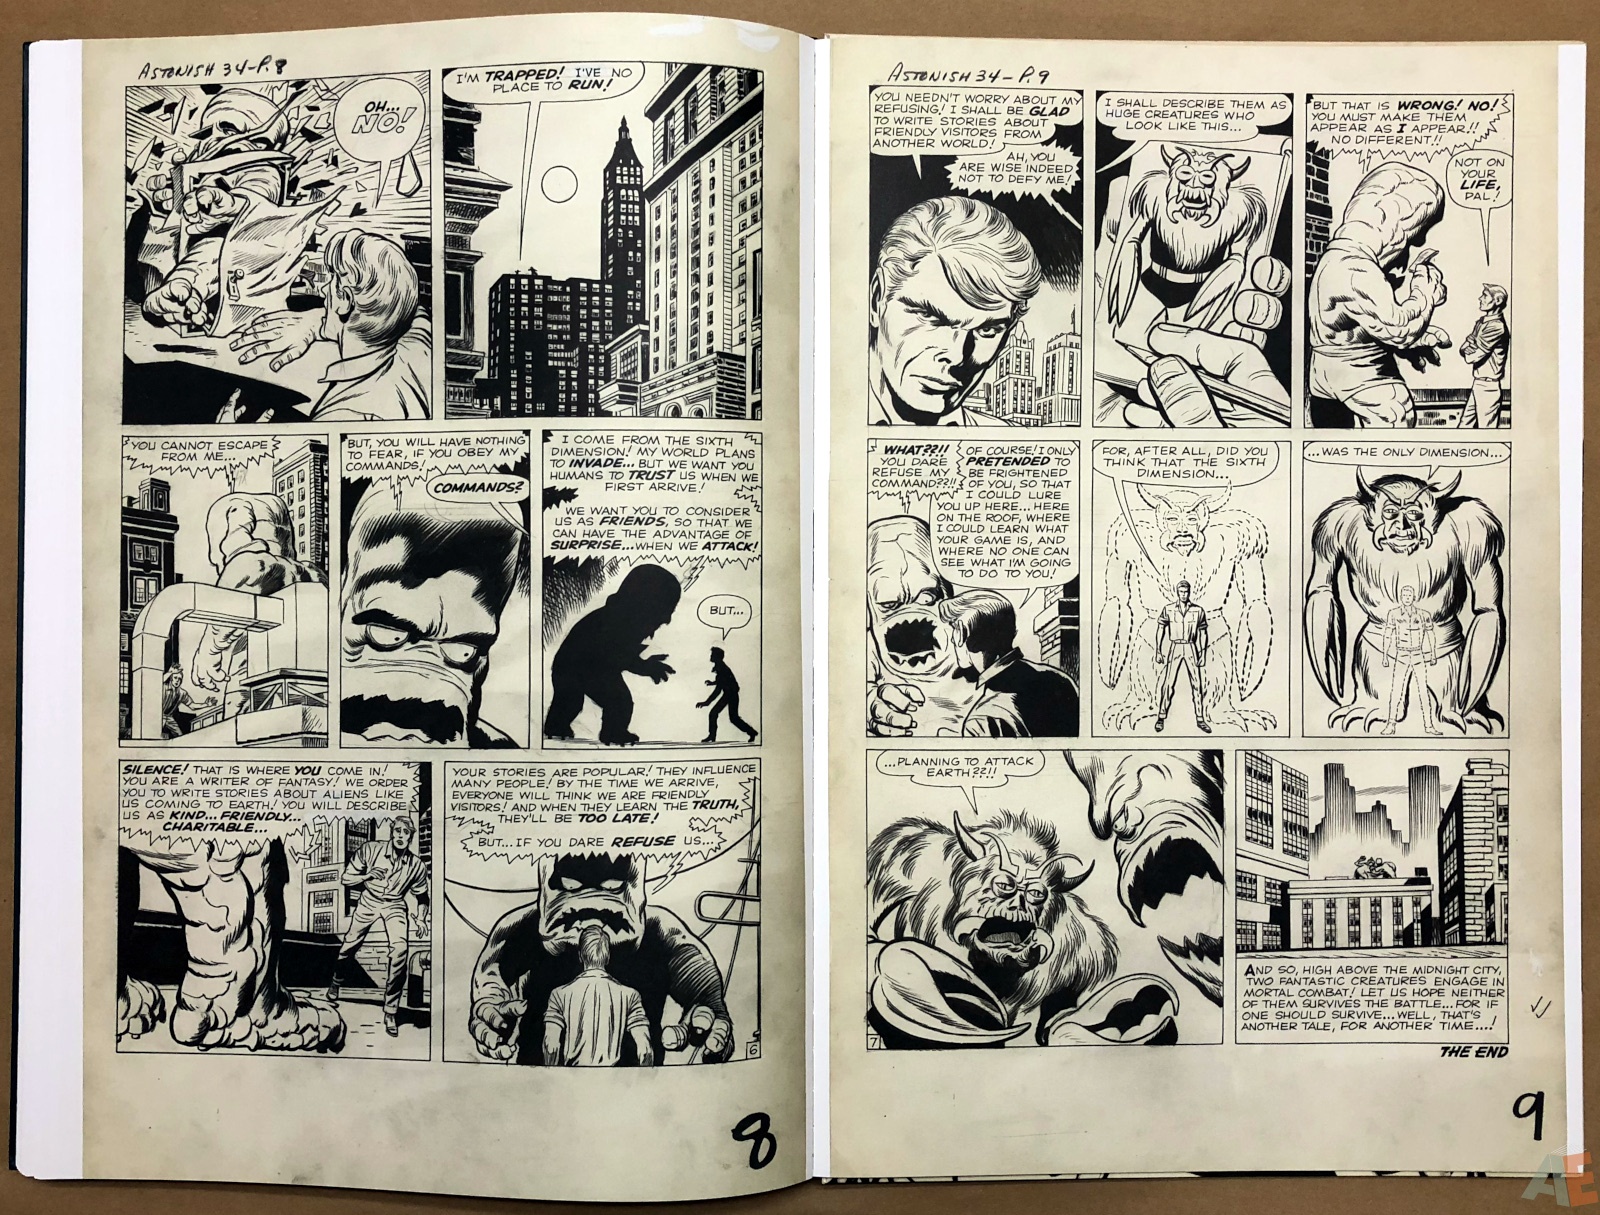 Jack Kirby's Marvel Heroes and Monsters Artist's Edition